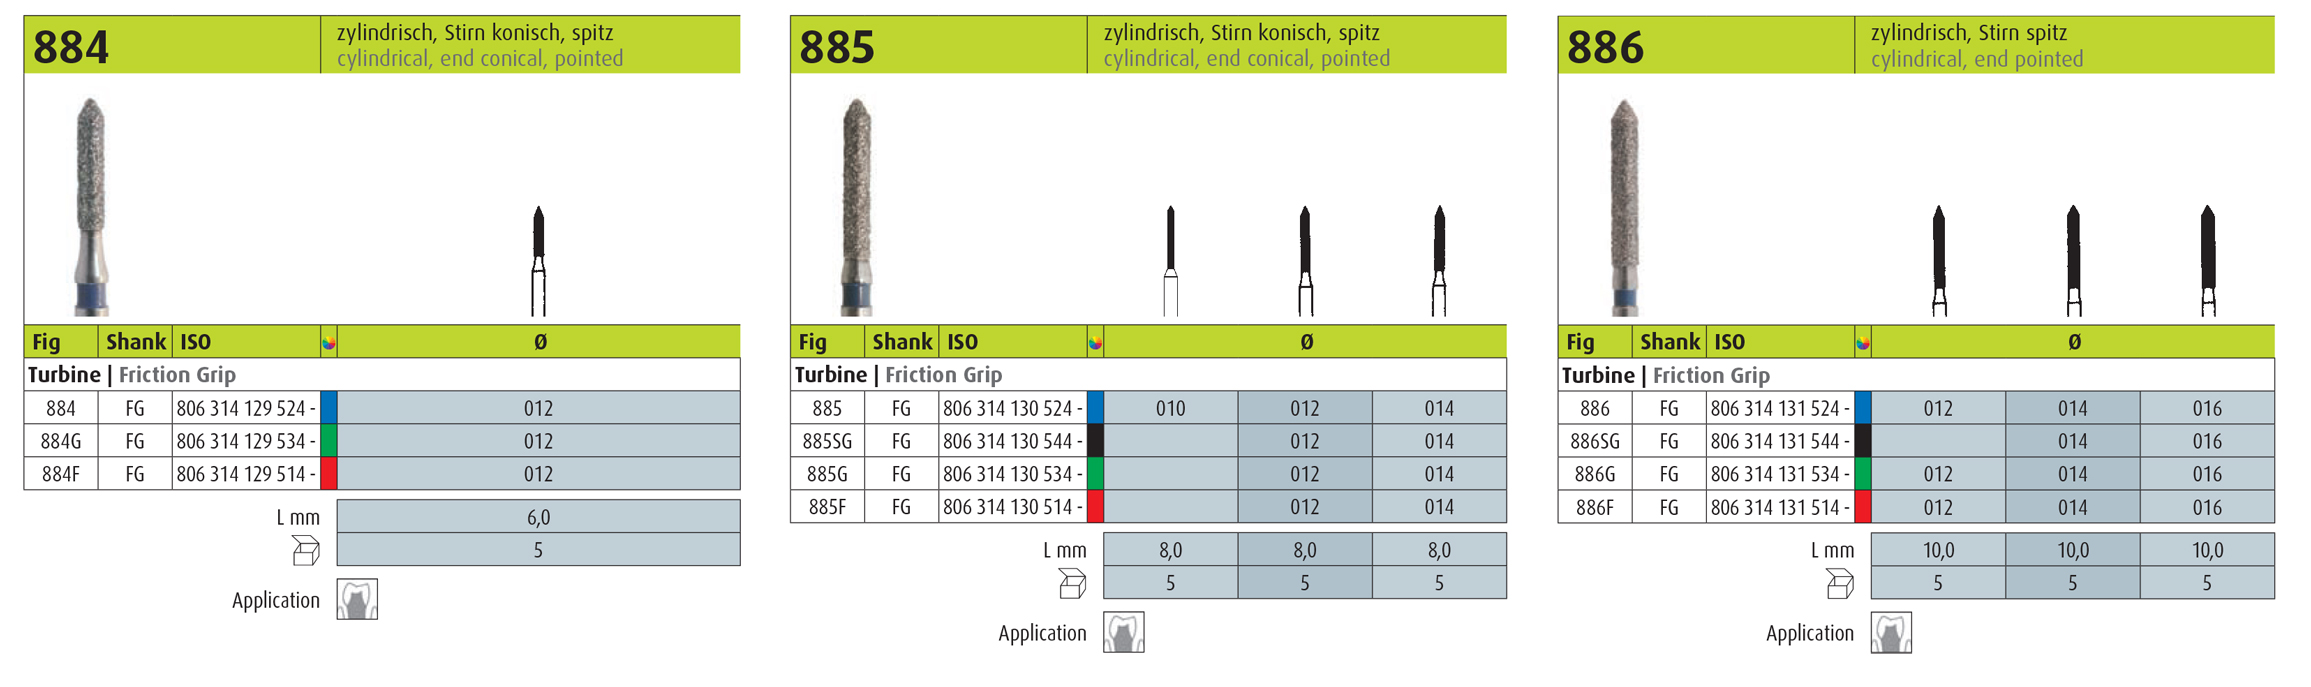 jota 884, 885, 886 cylindrical, end conical, pointed burs